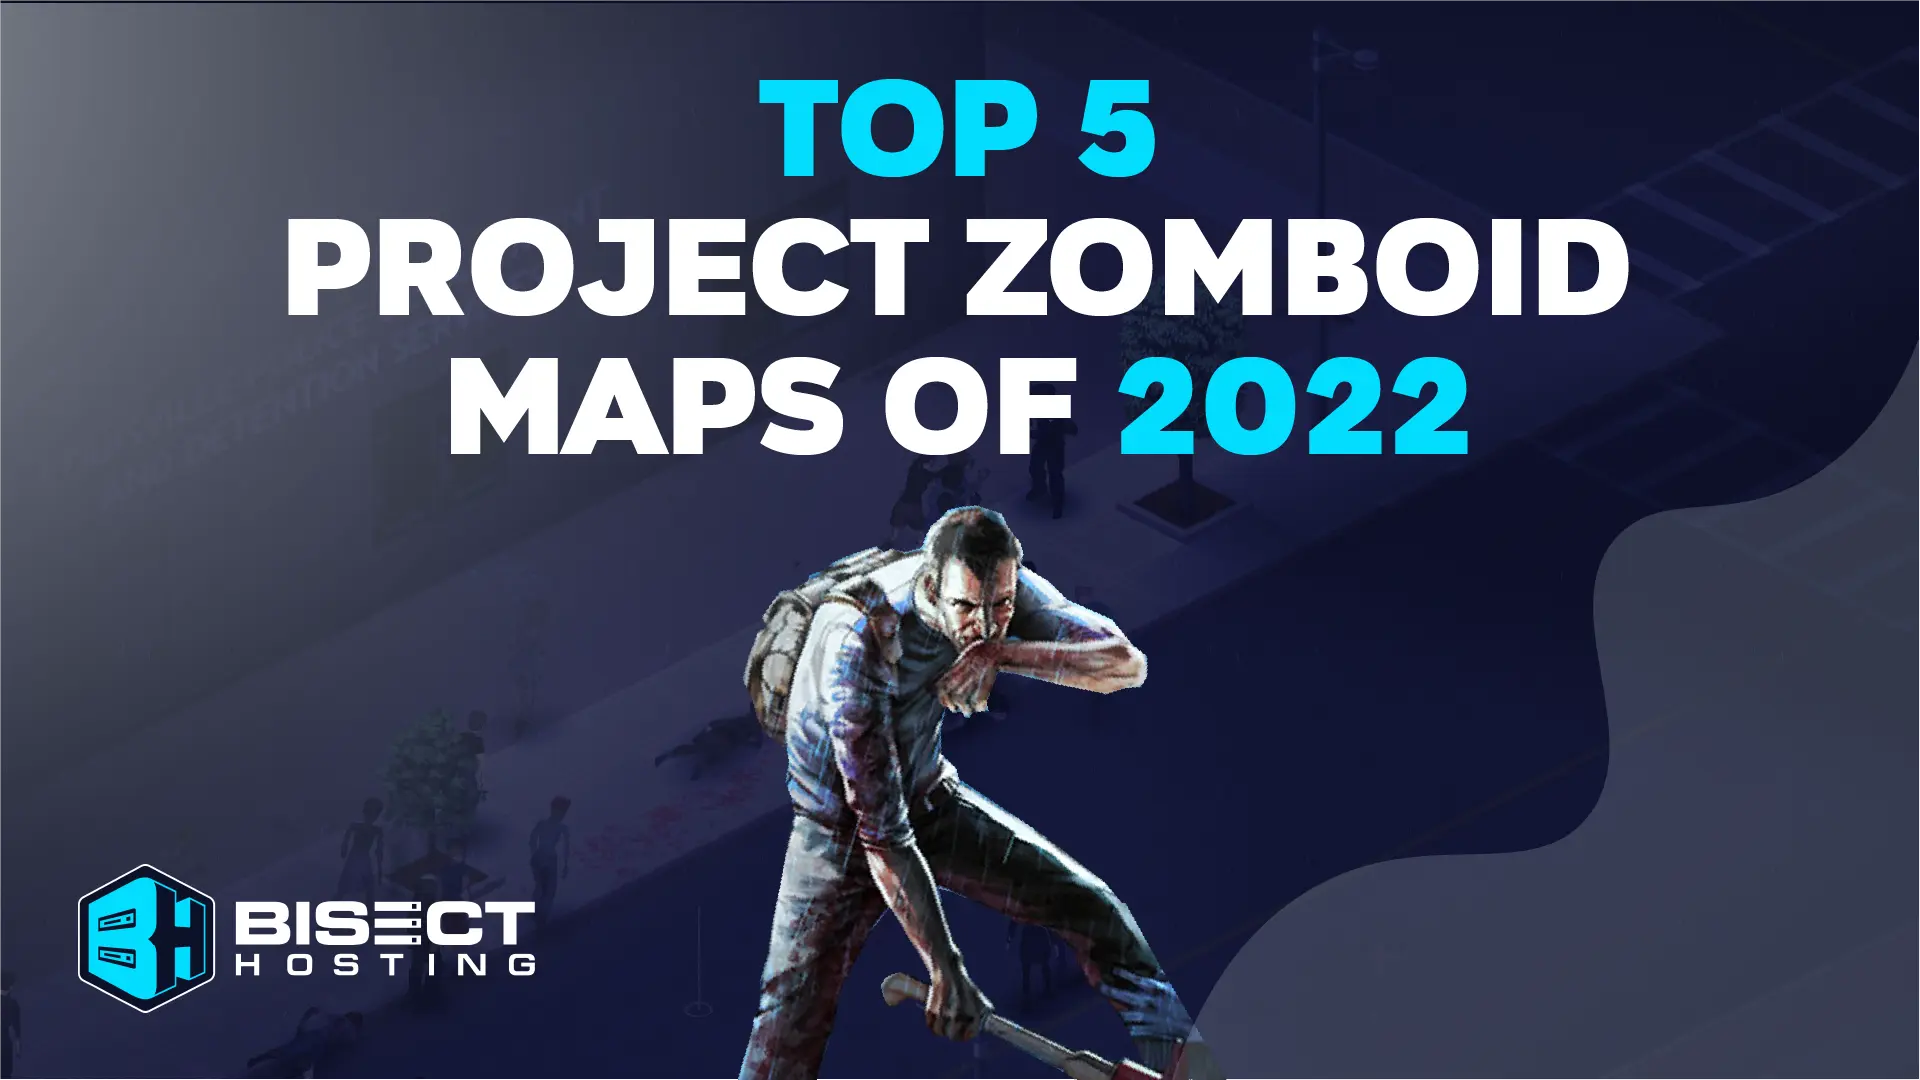 Top 5 Project Zomboid Maps of 2022